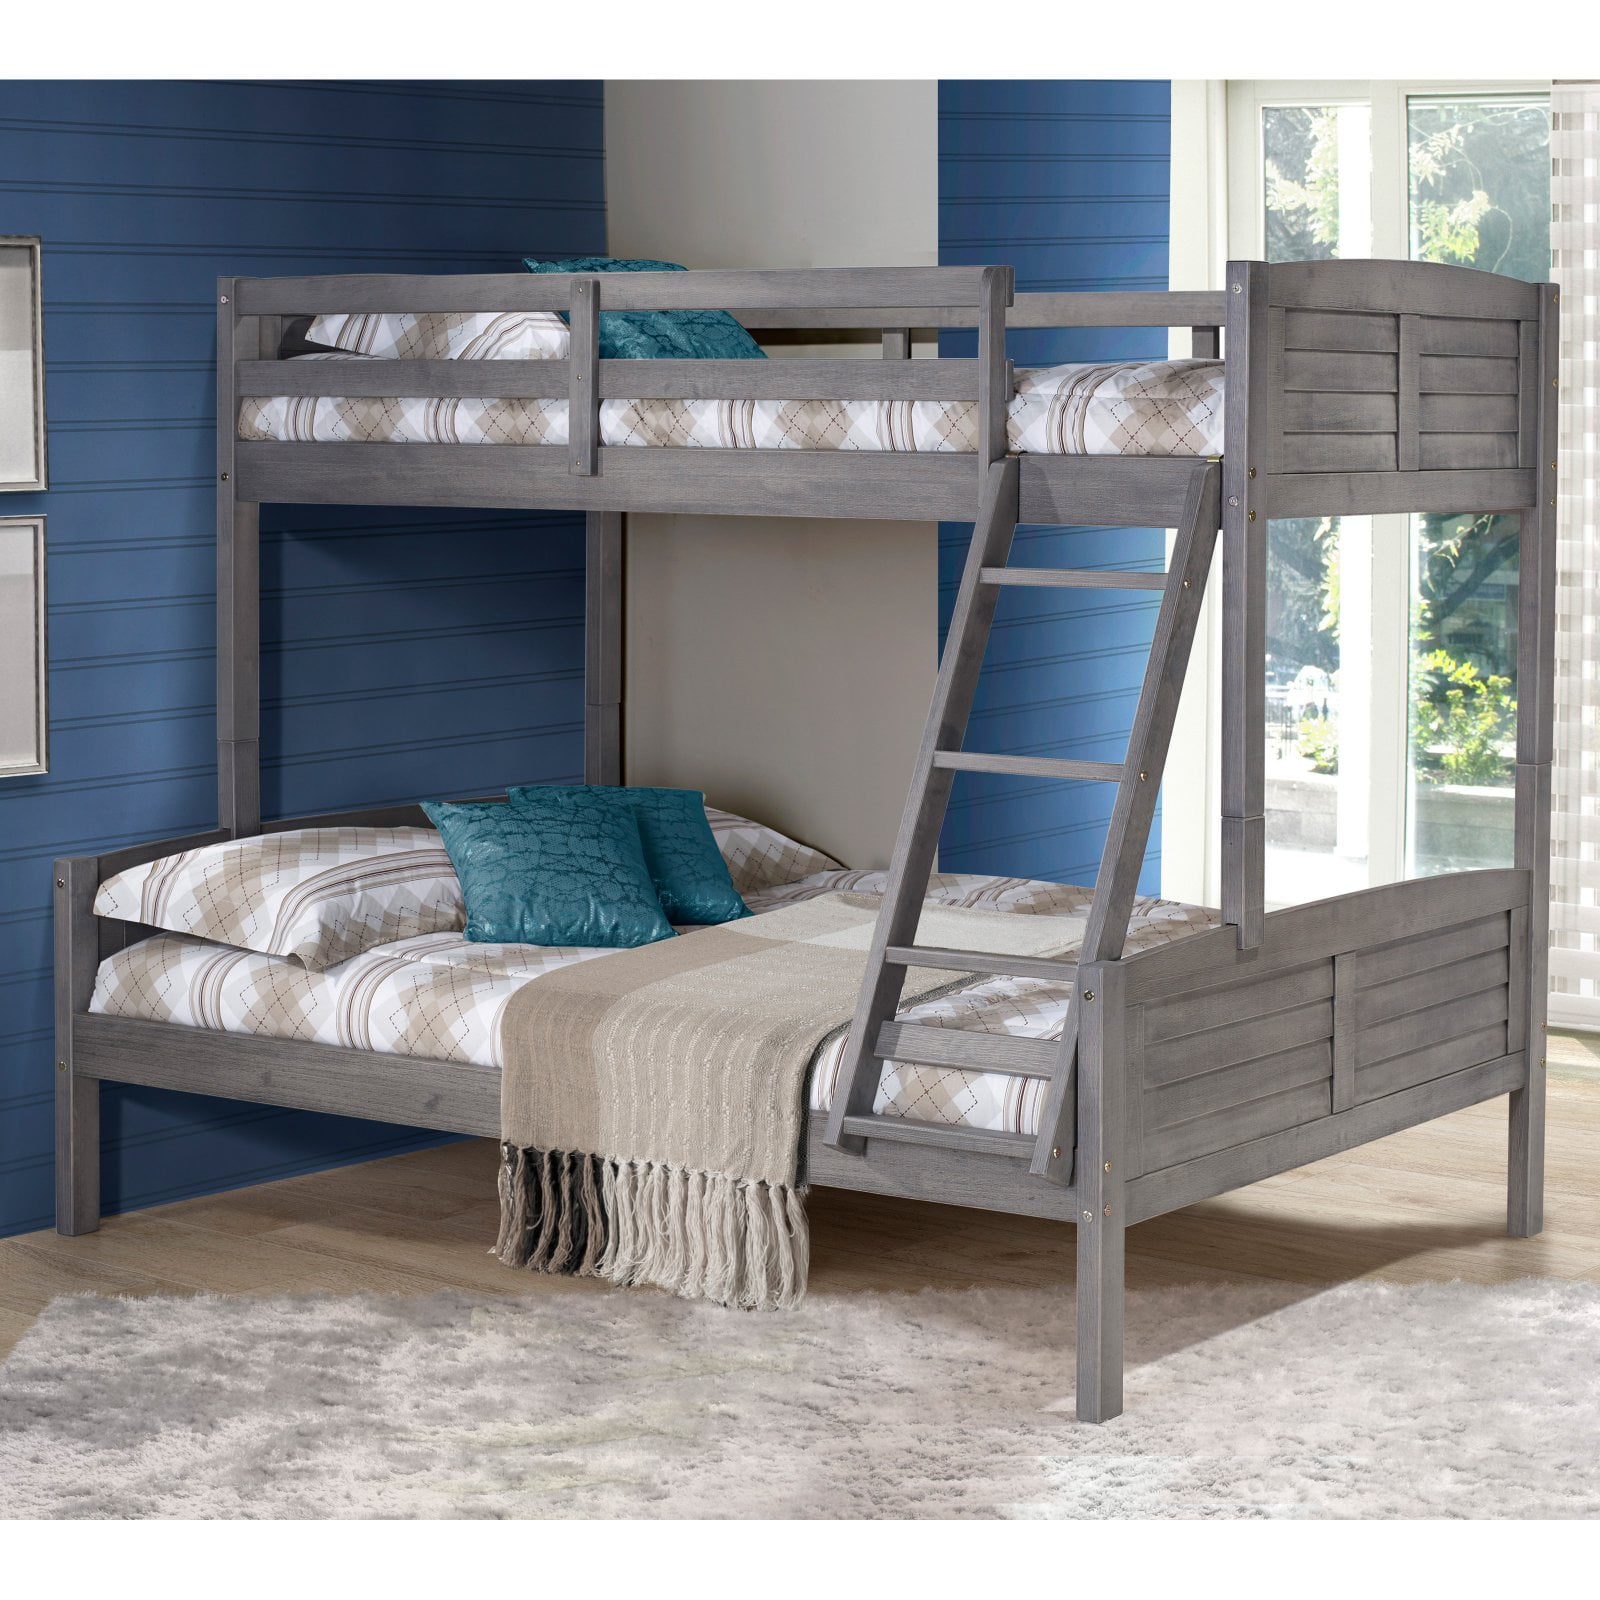 Donco Kids Louver Wood Bunk Bed Twin, Kids Bunk Beds Twin Over Full